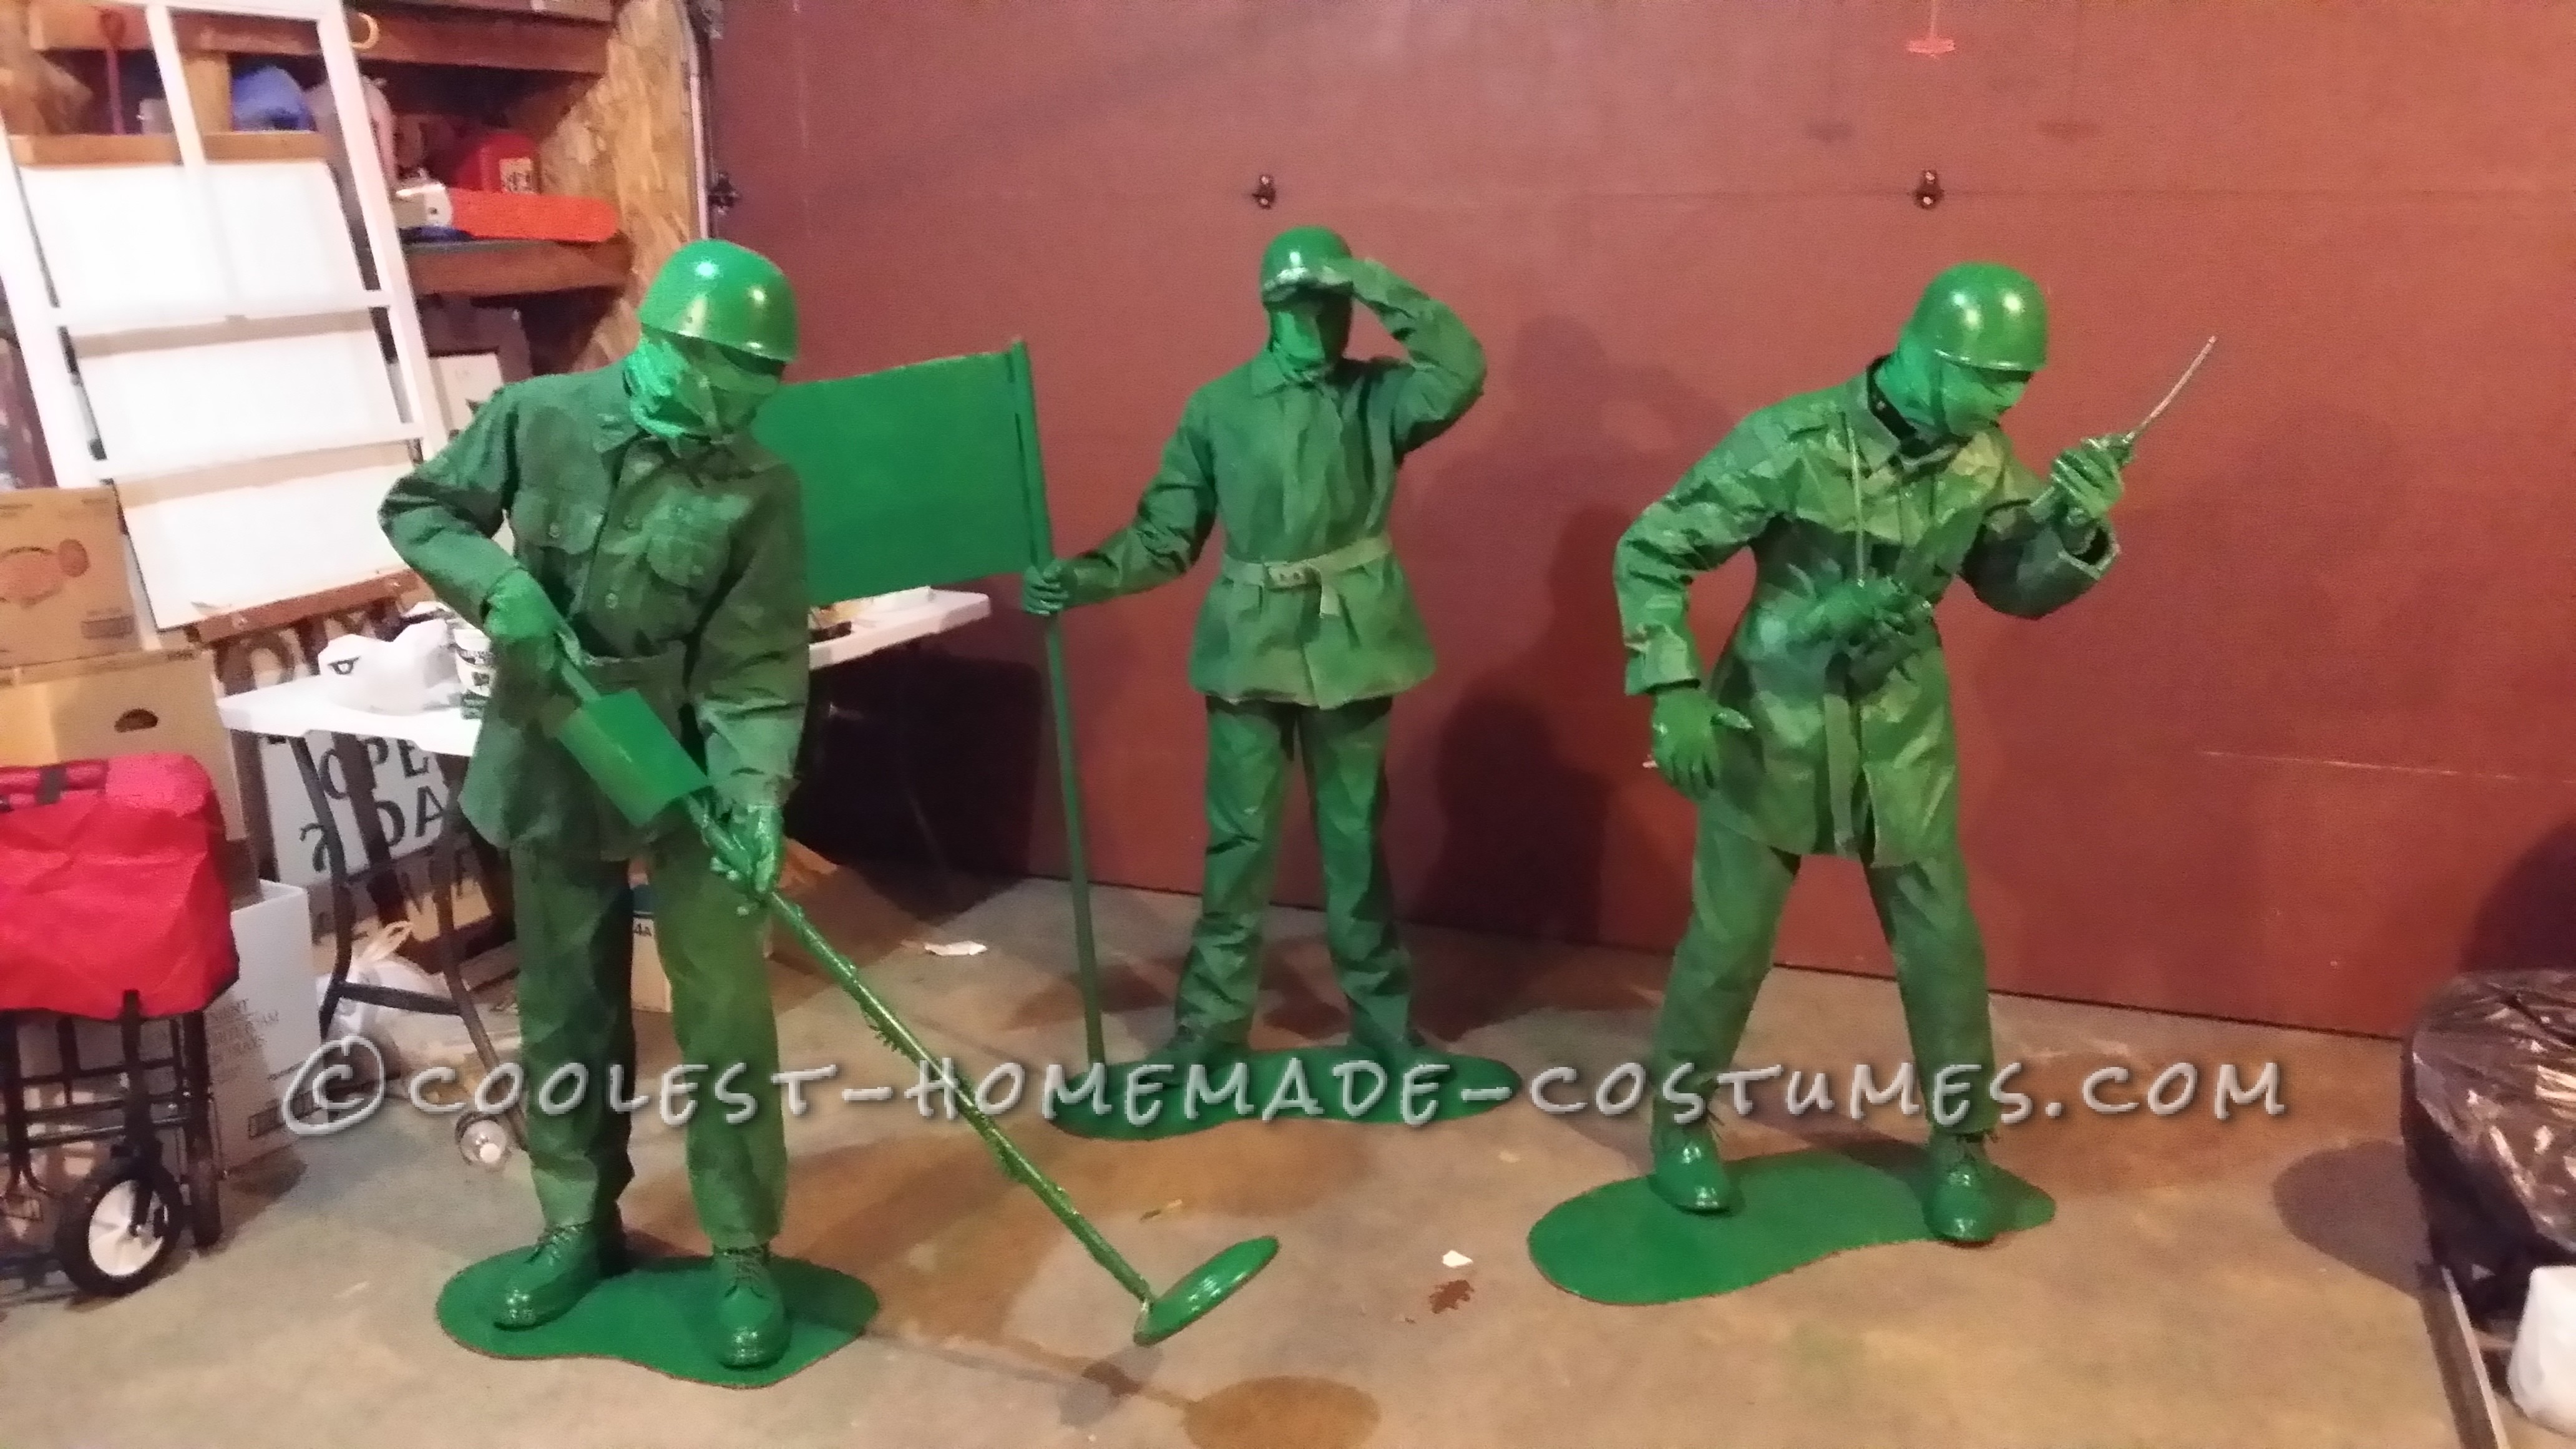 Cool Costume for Our Triplets: Green Army Men